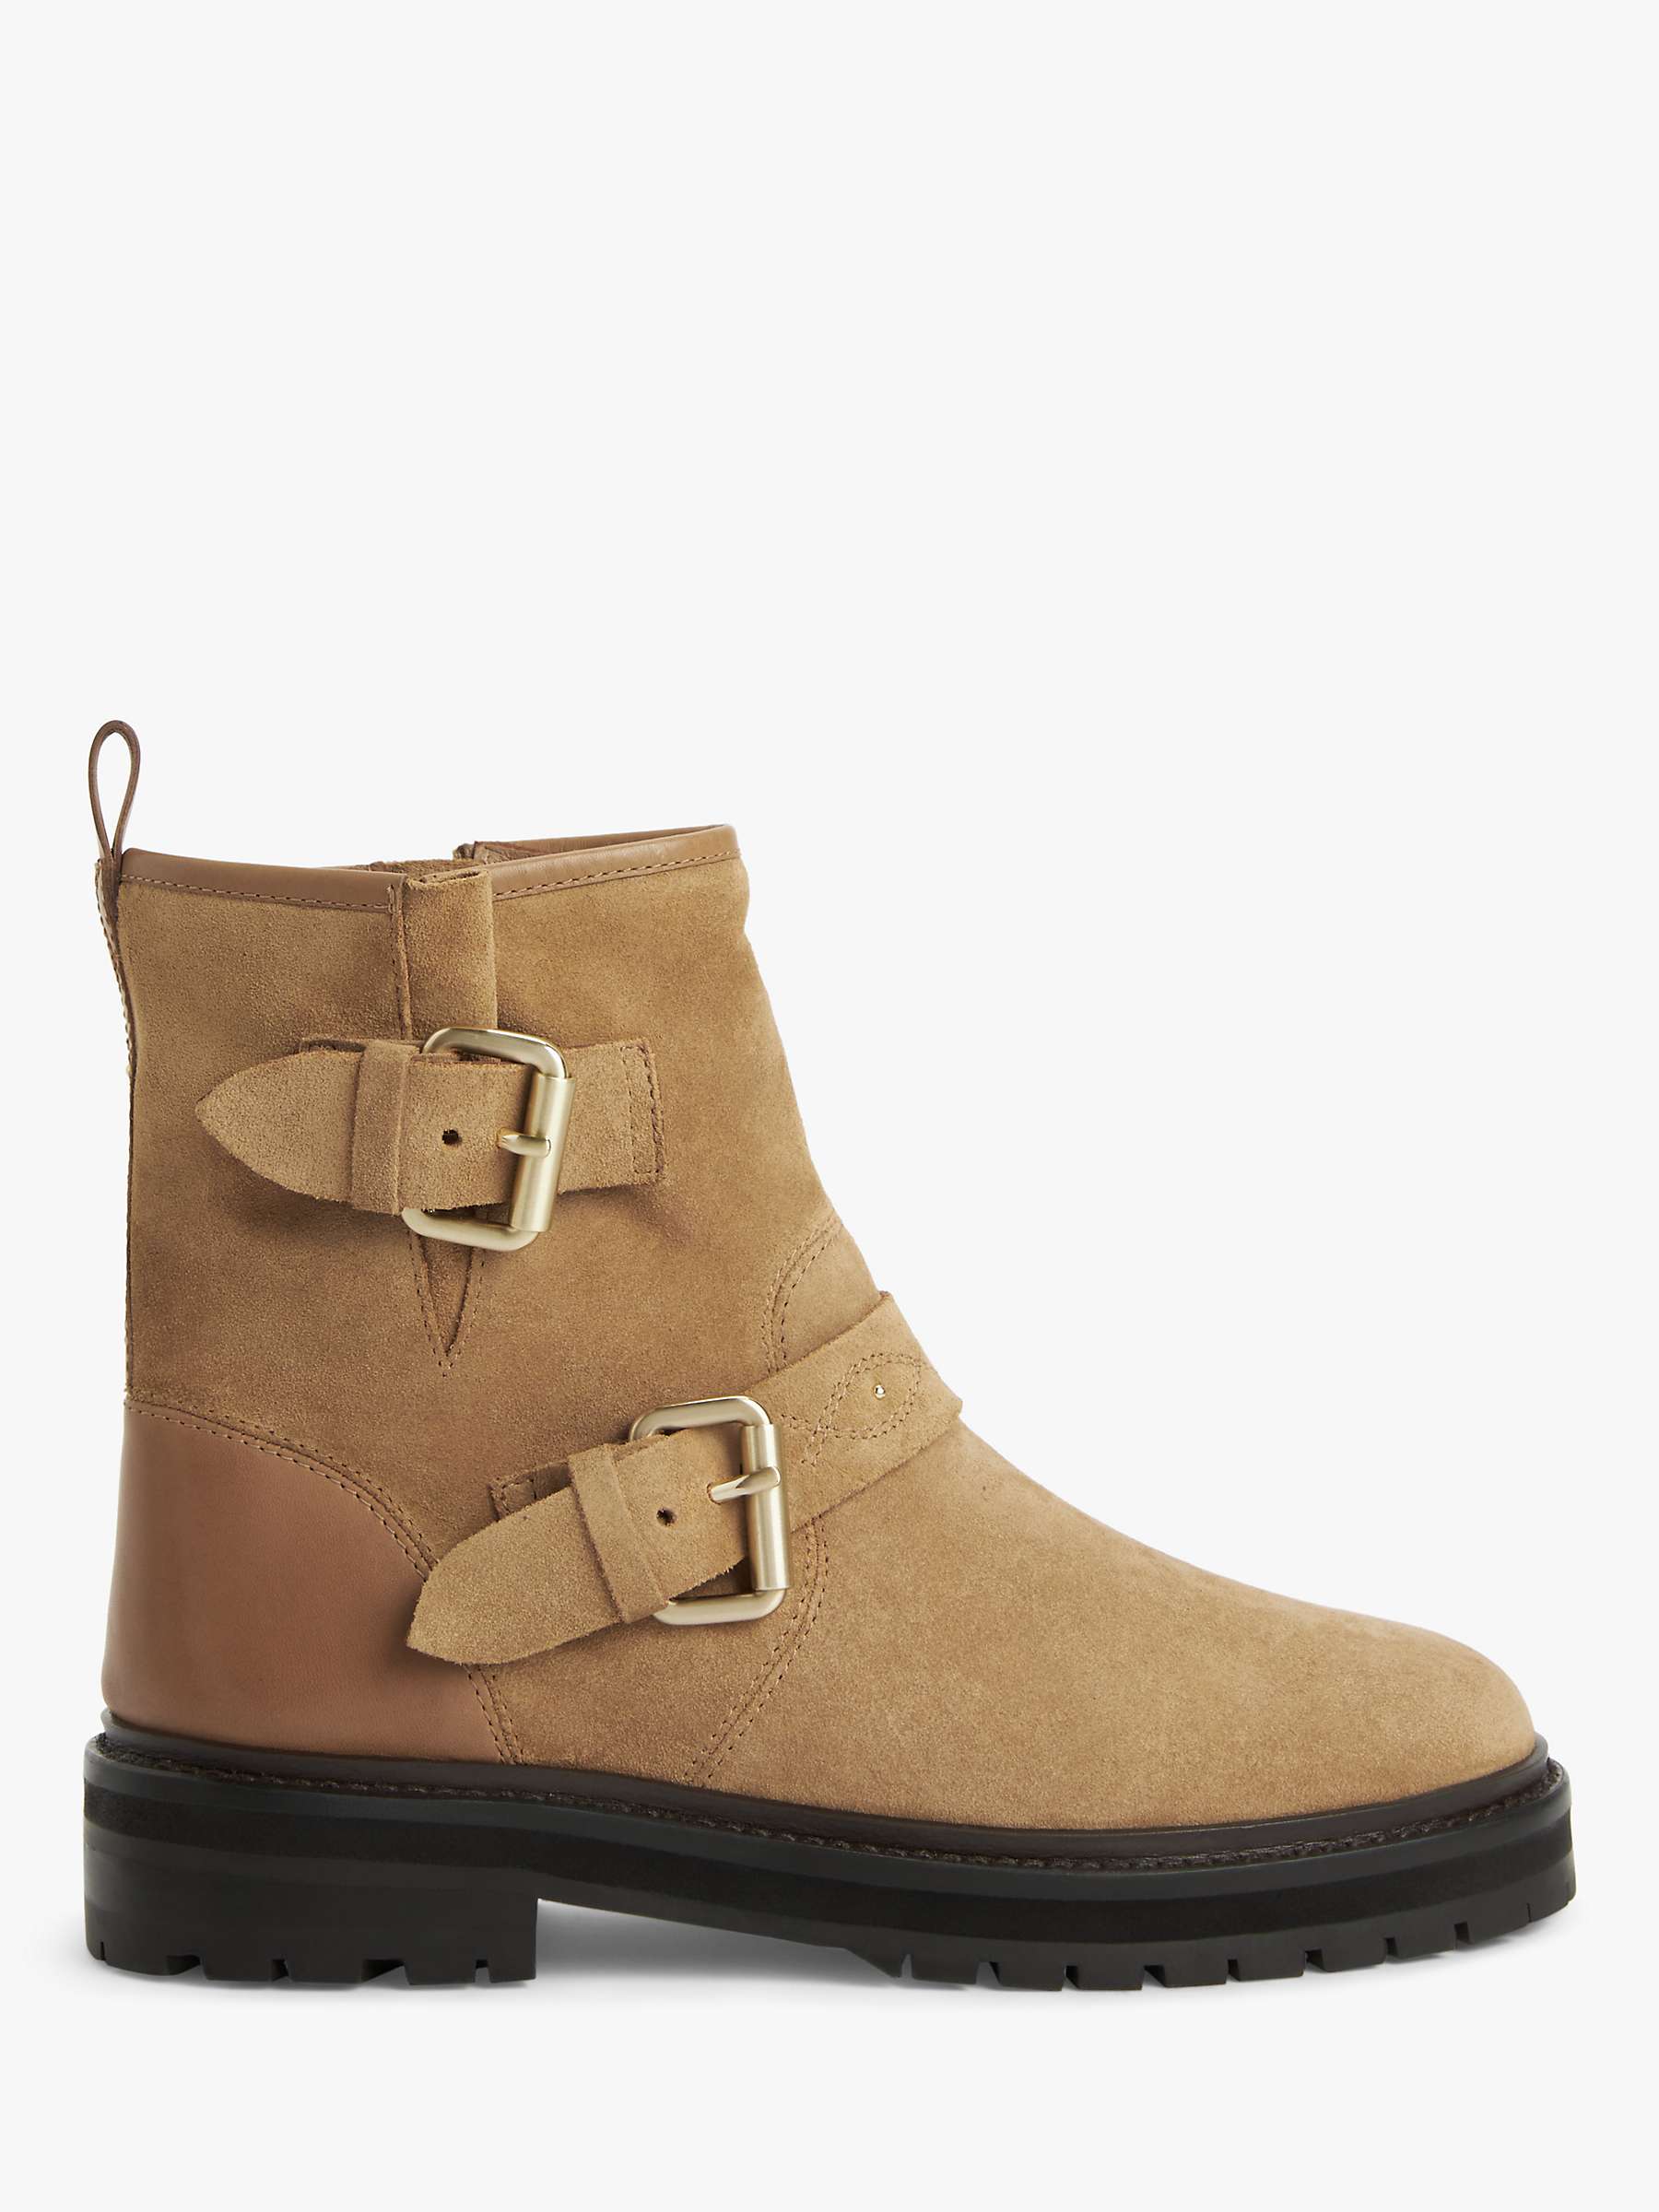 Buy AND/OR River Suede Double Buckle Biker Boots, Light Brown Online at johnlewis.com